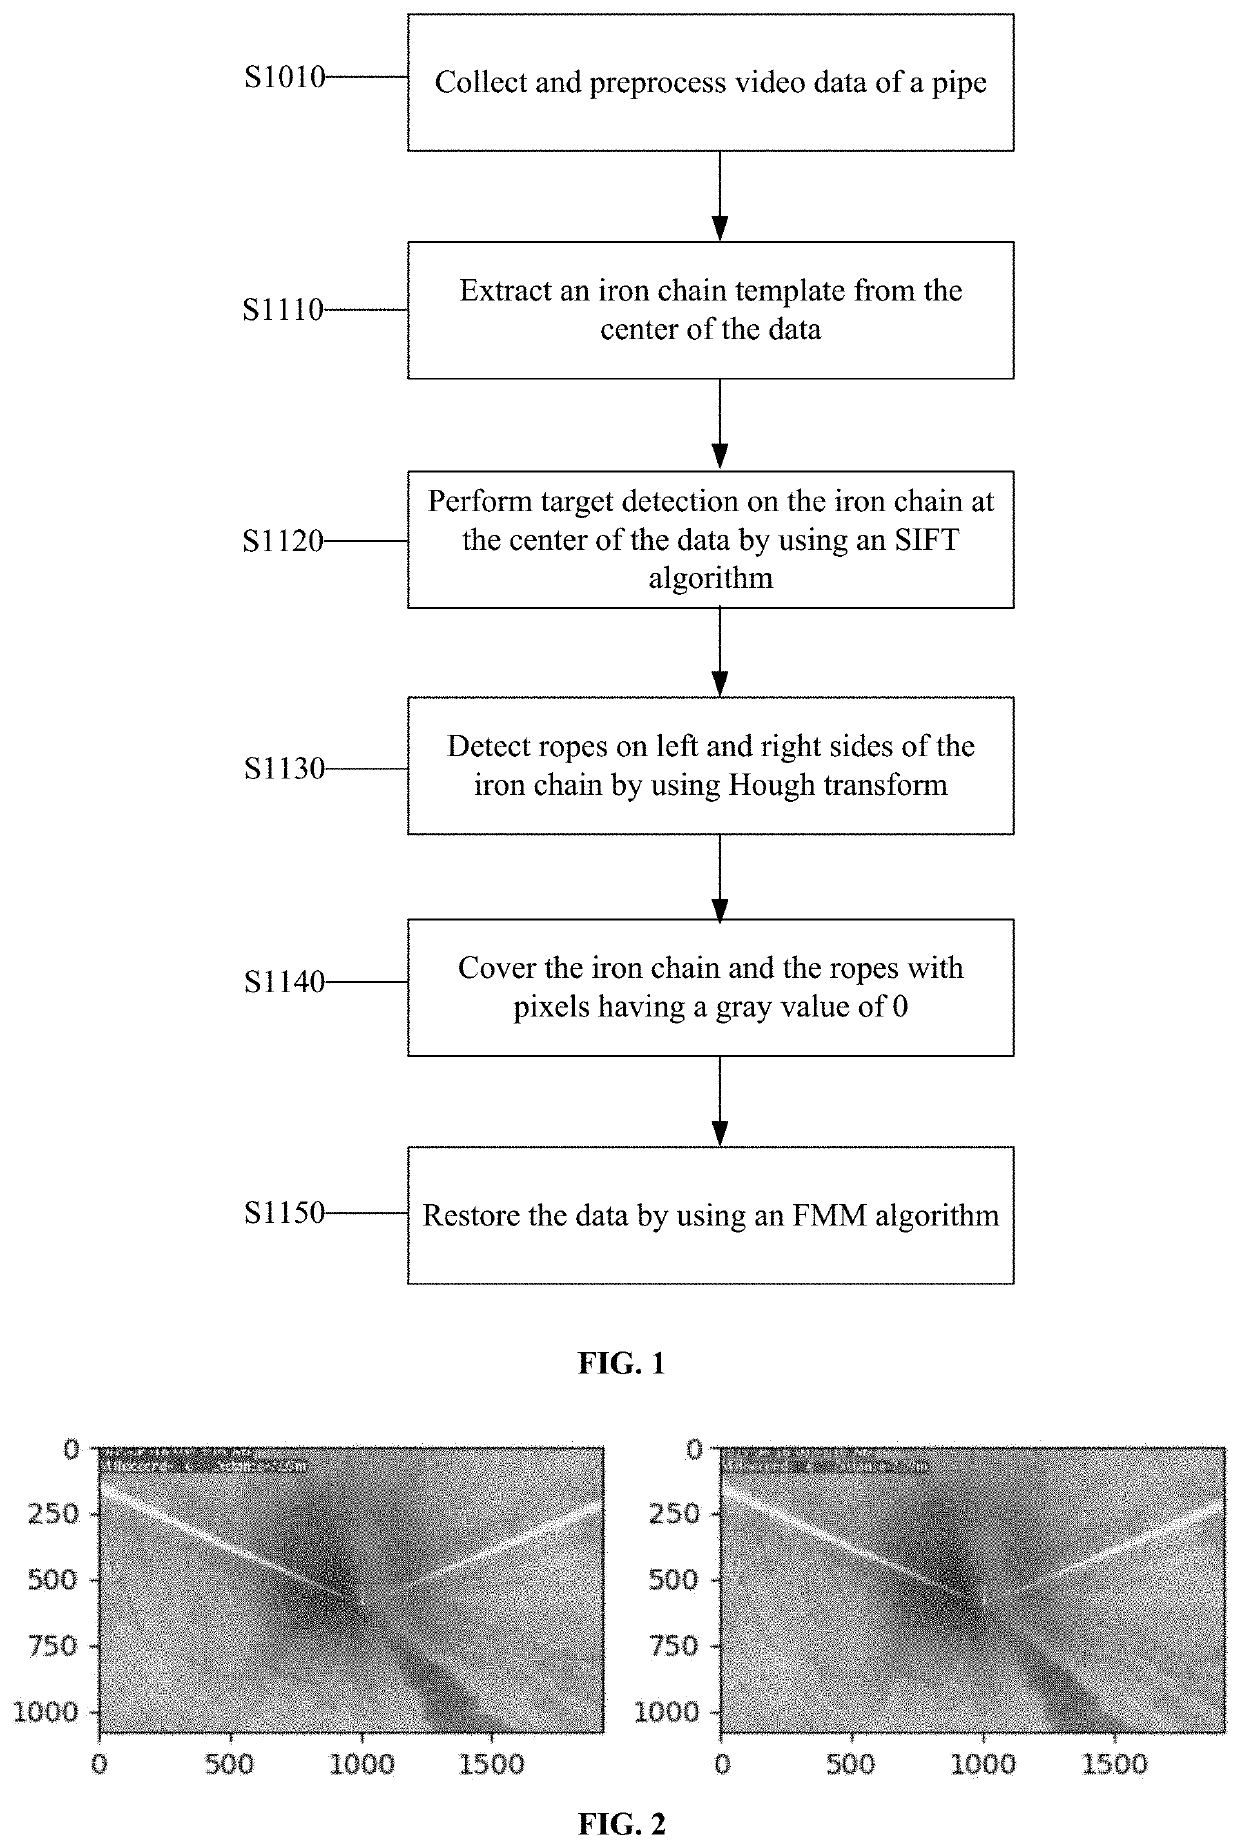 Method for restoring video data of drainage pipe based on computer vision